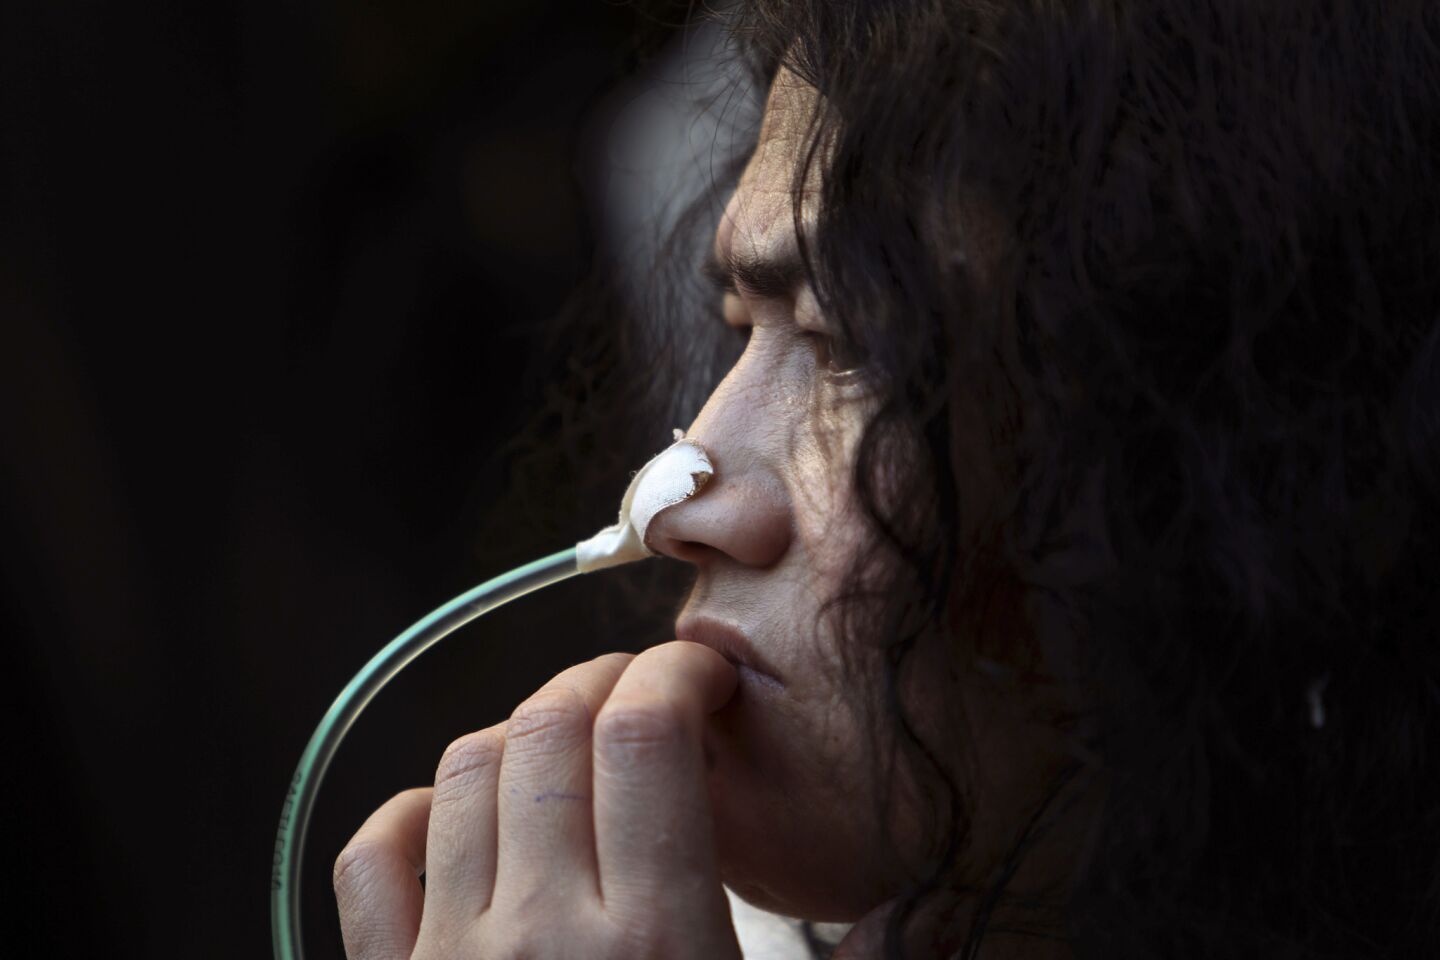 Irom Sharmila attends a news conference in New Delhi in March 2013 after being charged with attempted suicide over her hunger strike.